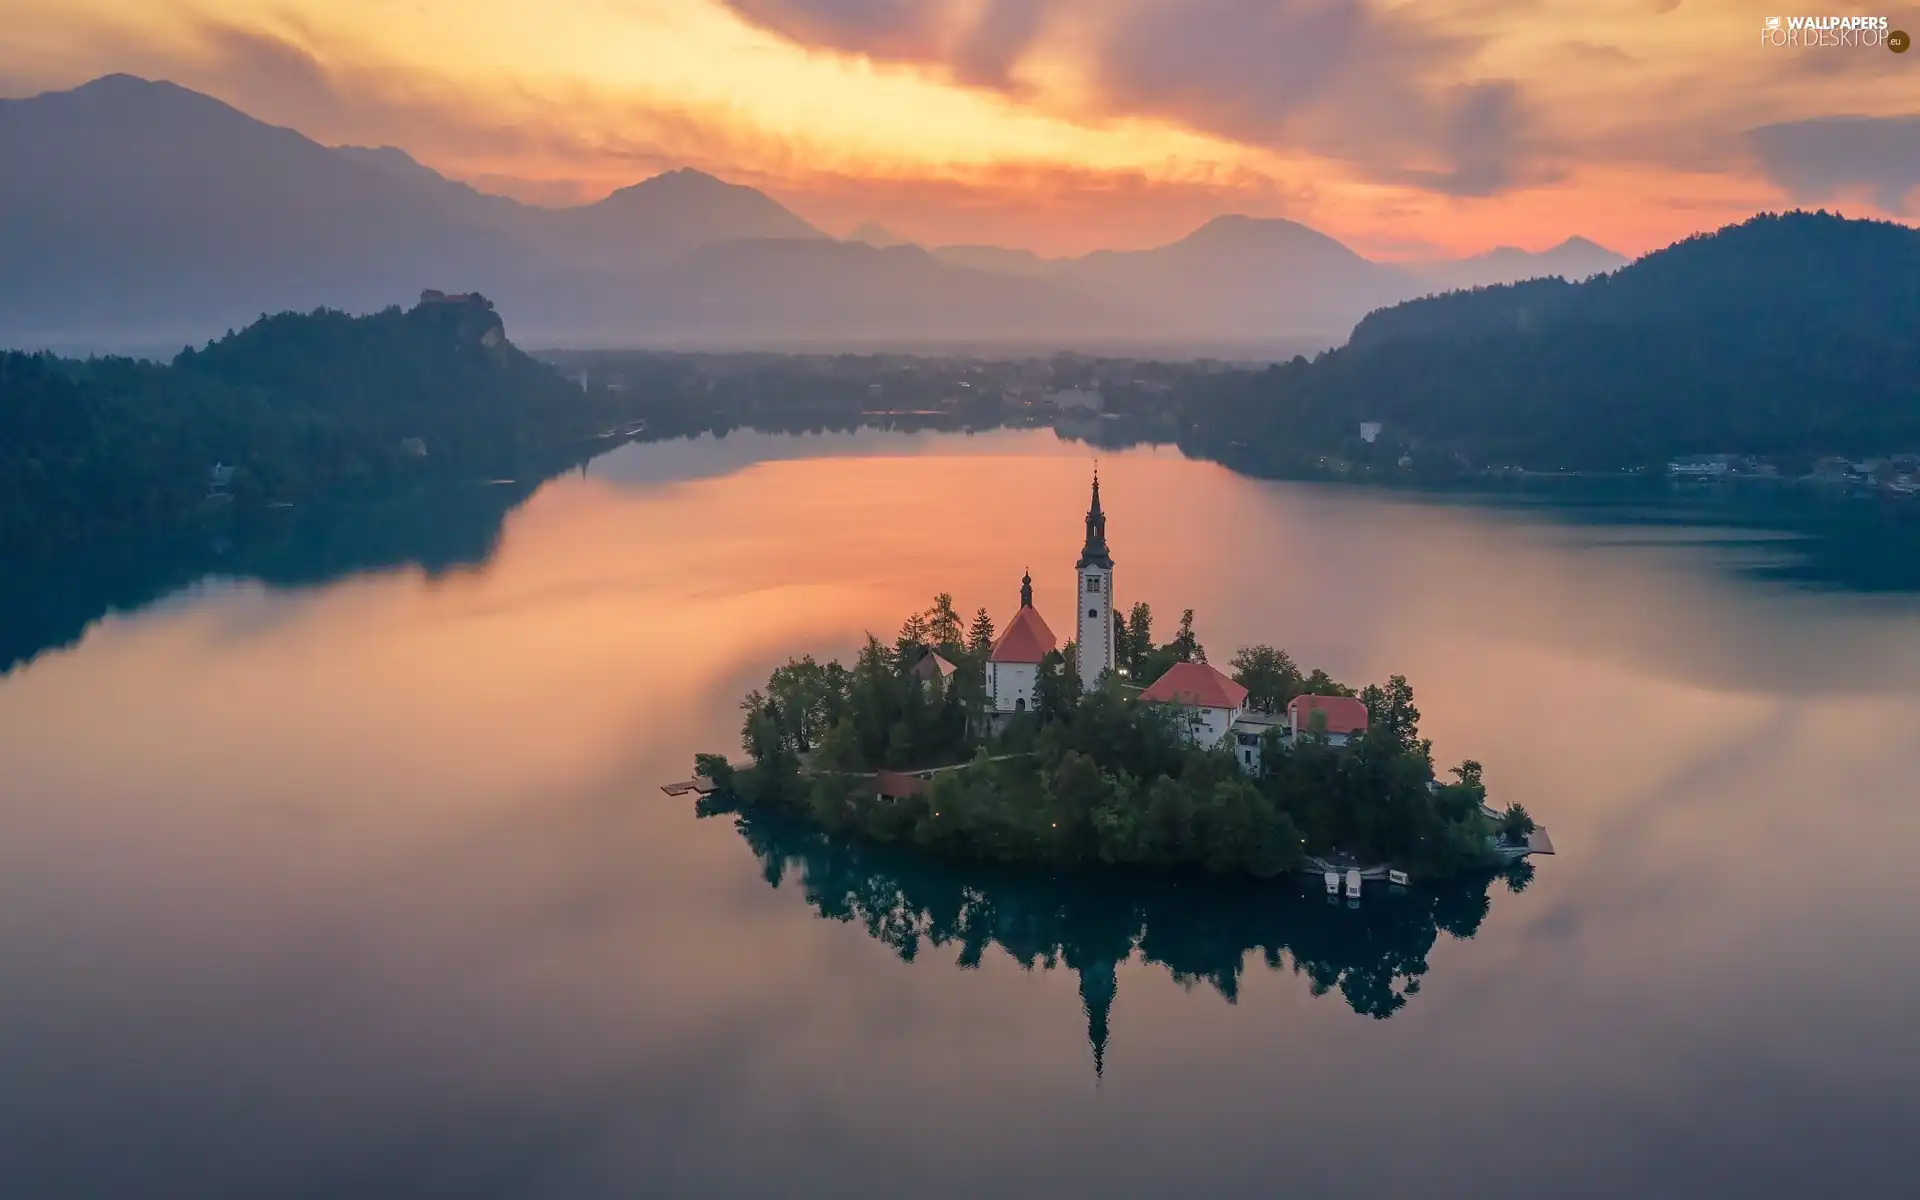 Church of the Annunciation of the Virgin Mary, Lake Bled, Great Sunsets, Blejski Otok Island, Slovenia, Julian Alps Mountains, reflection